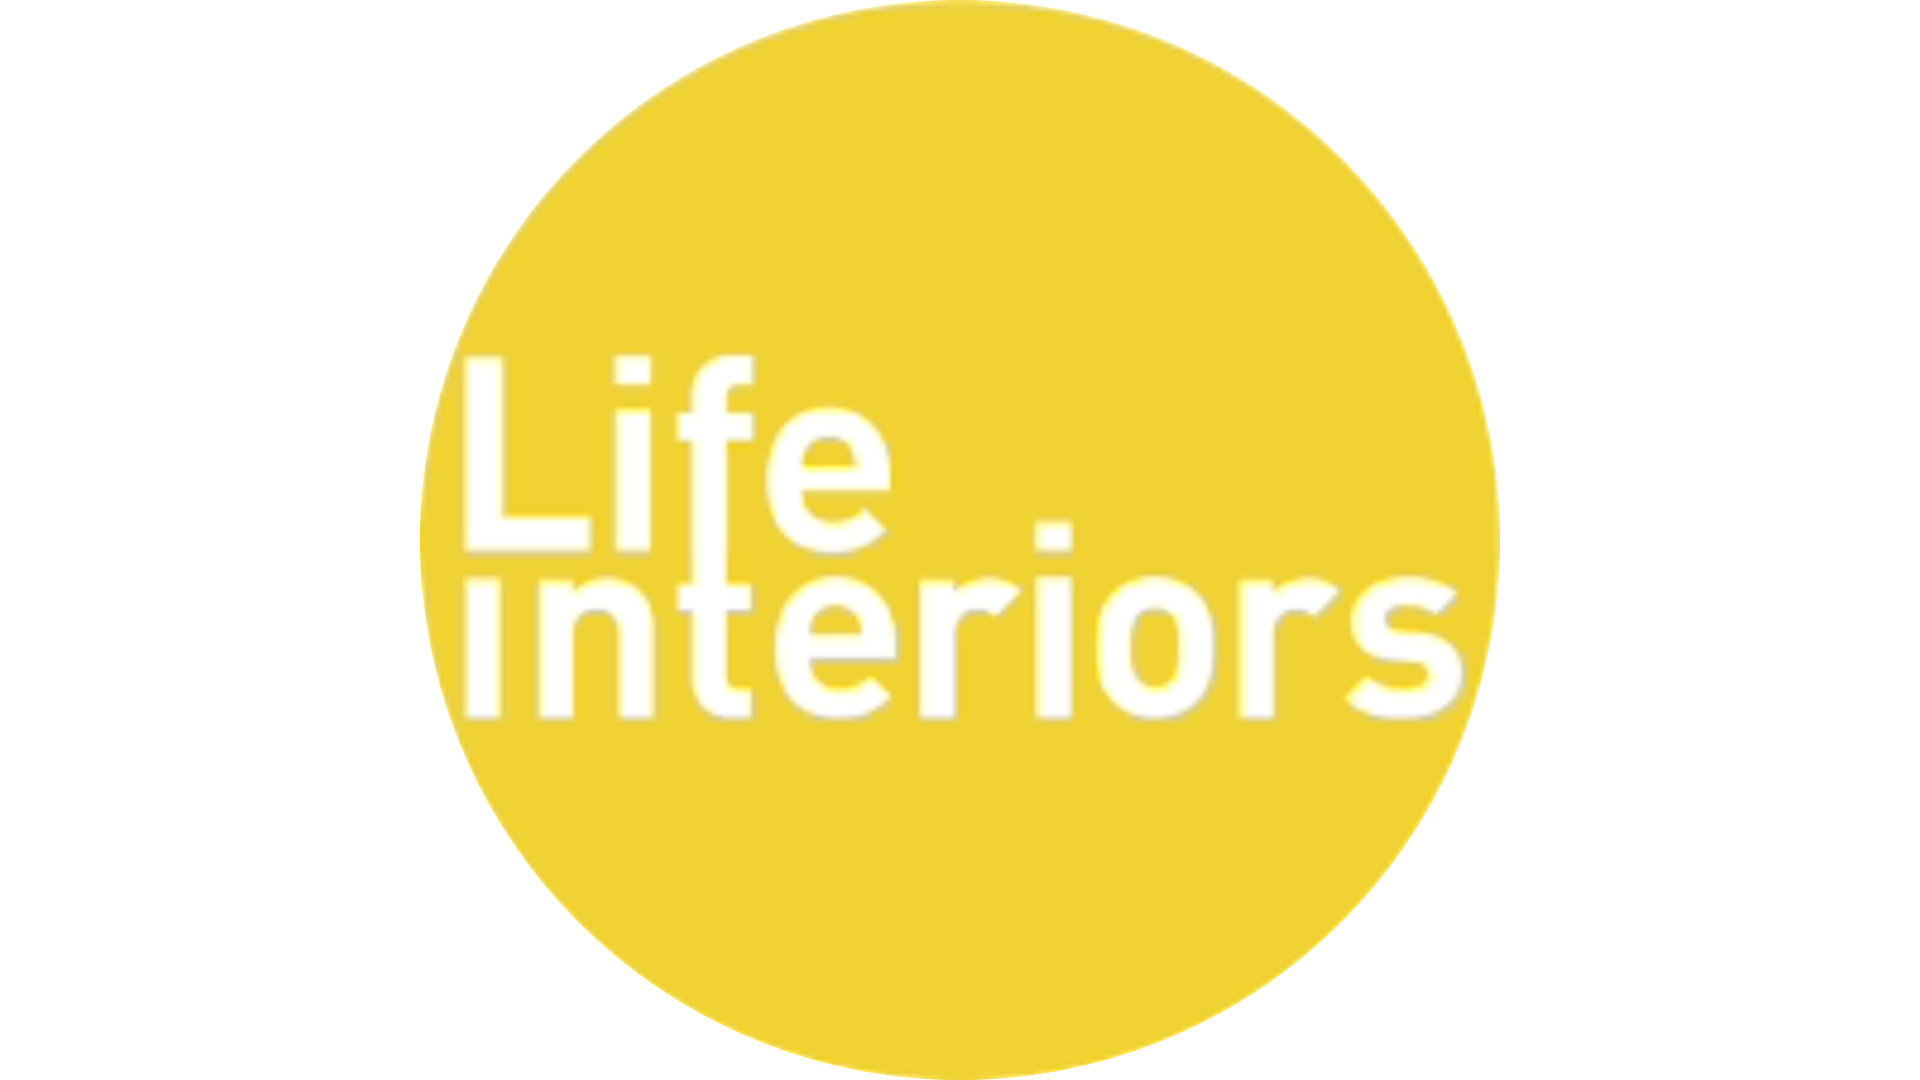 Get the Nordic style by shopping with Life Interiors